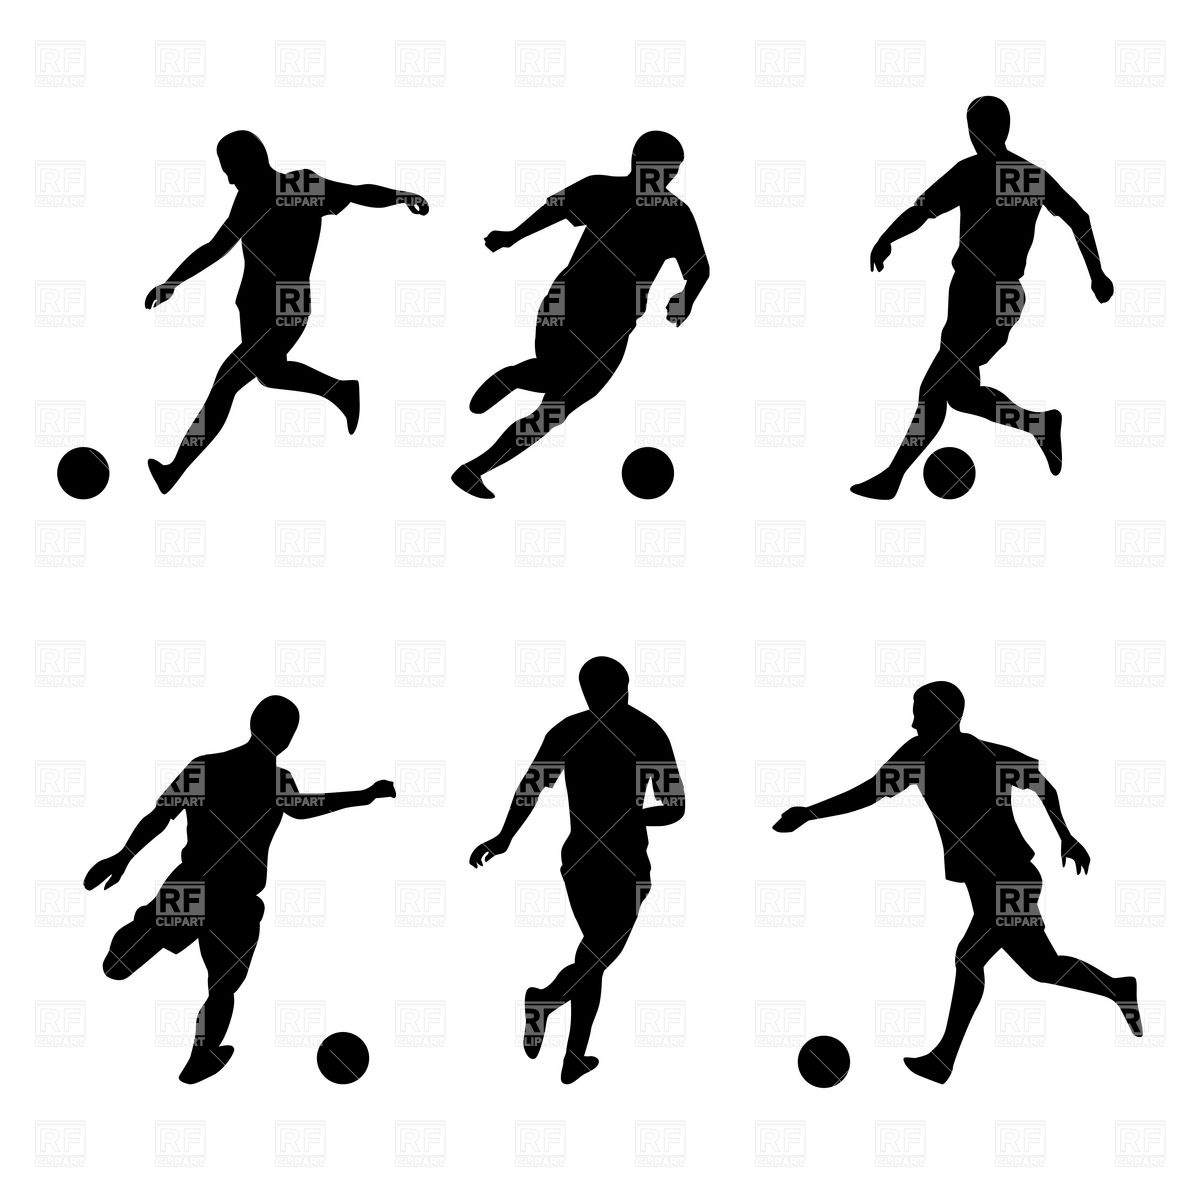 Football Players Silhouettes Download Royalty Free Vector Clipart